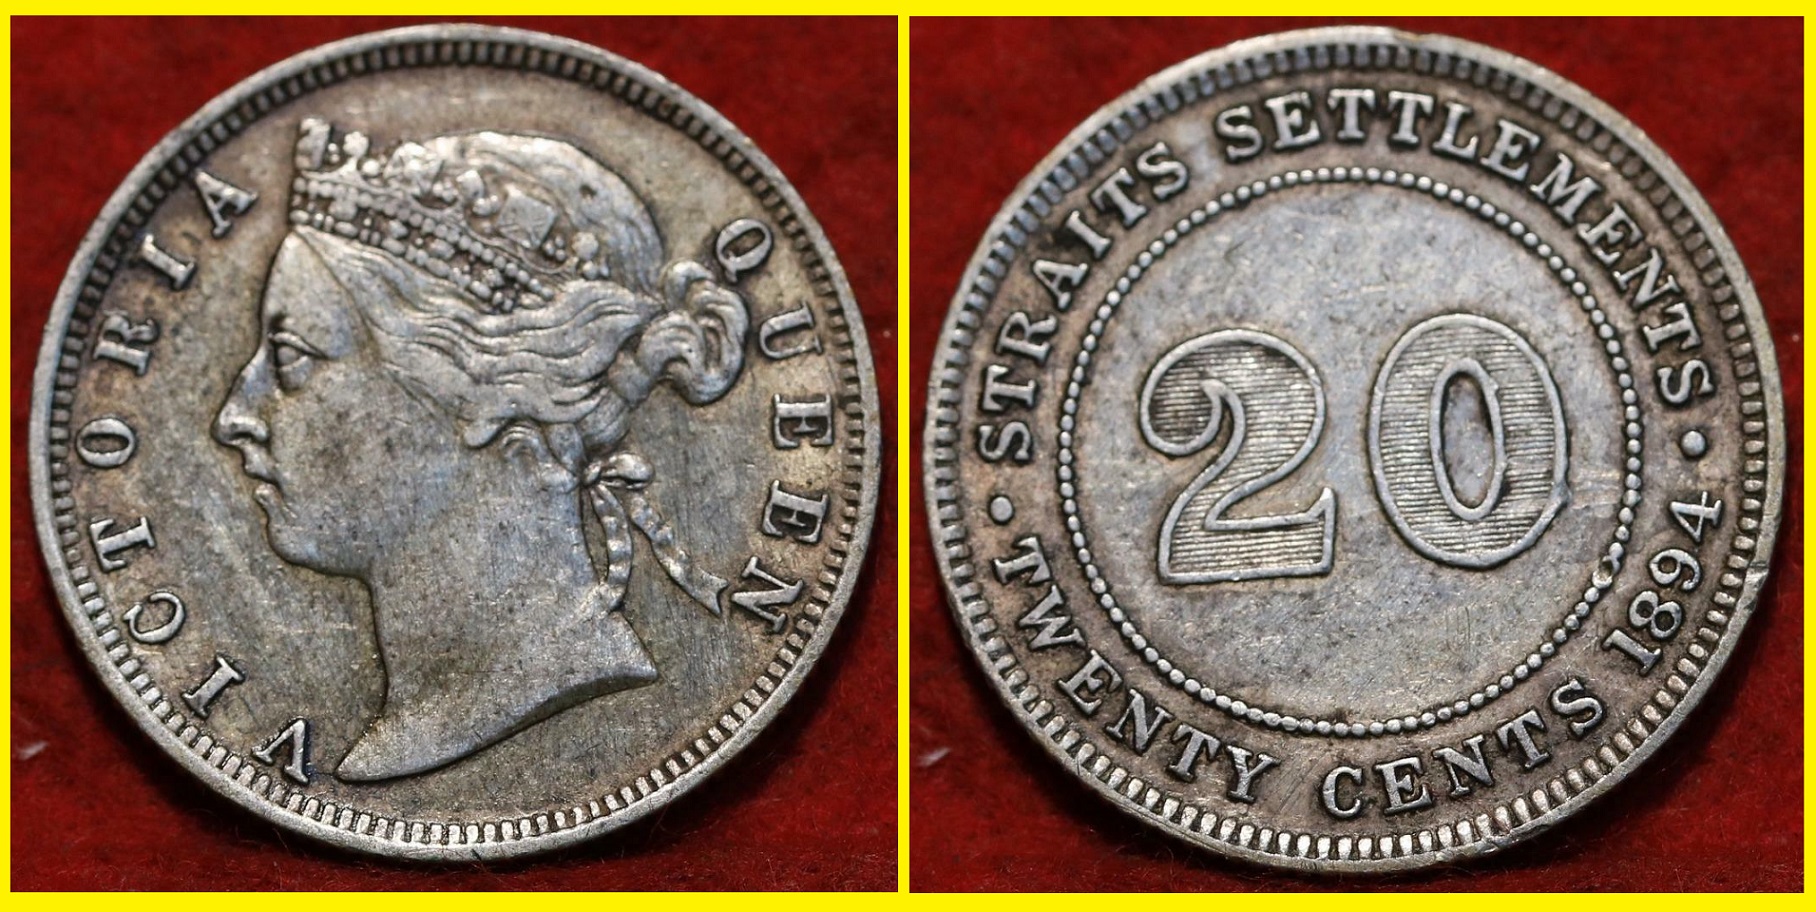 1894 Straits Settlements 20 Cents Silver Foreign Coin  $18. + $2.  233117015358  vette1986  o.jpg